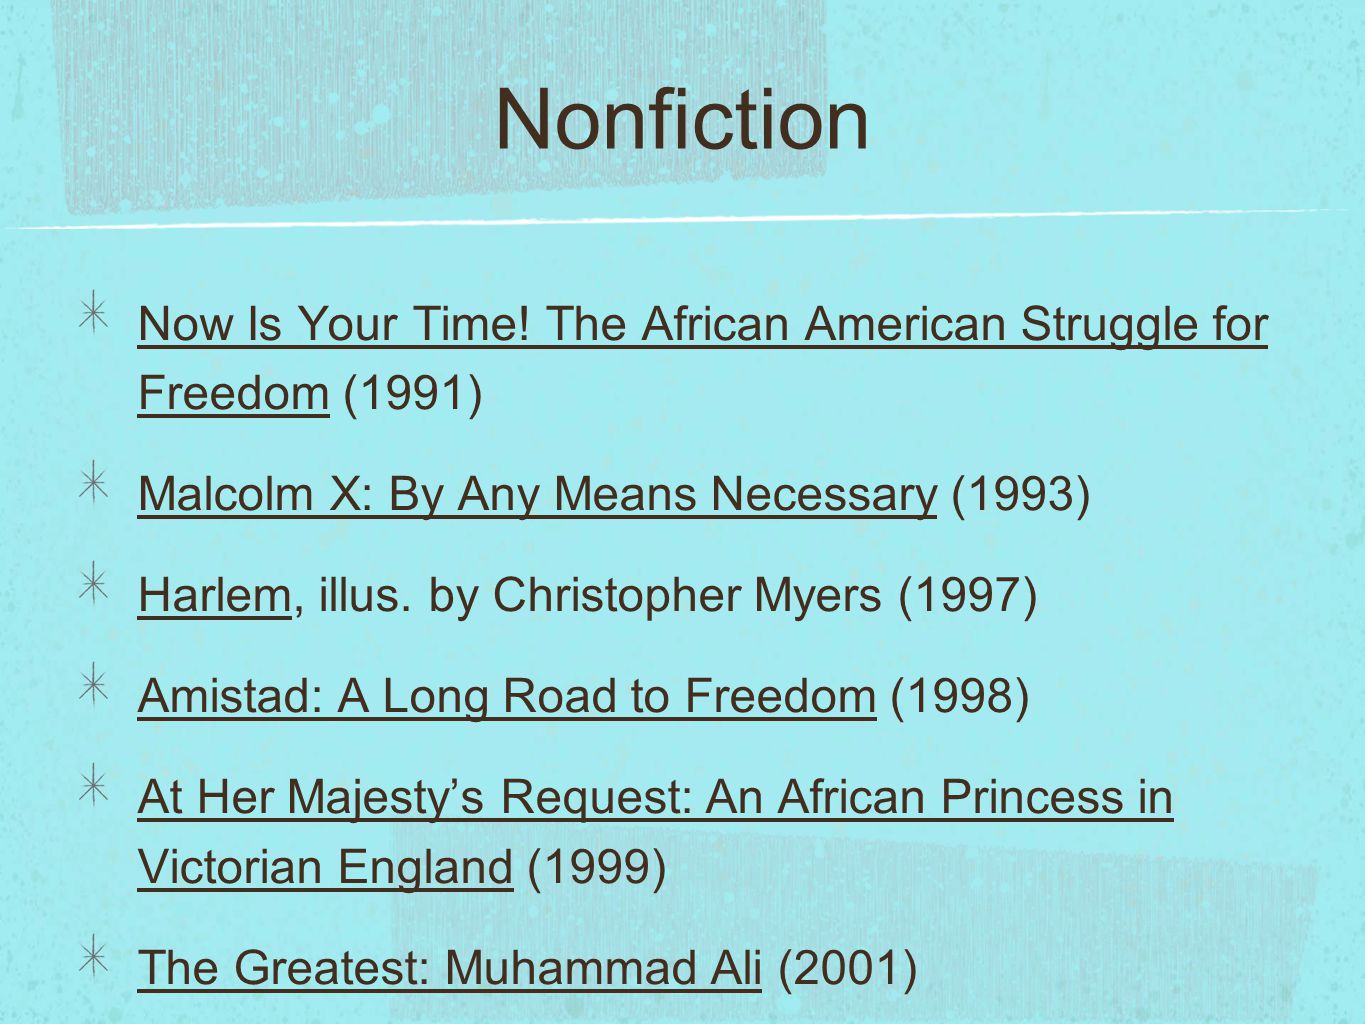 Nonfiction Now Is Your Time.